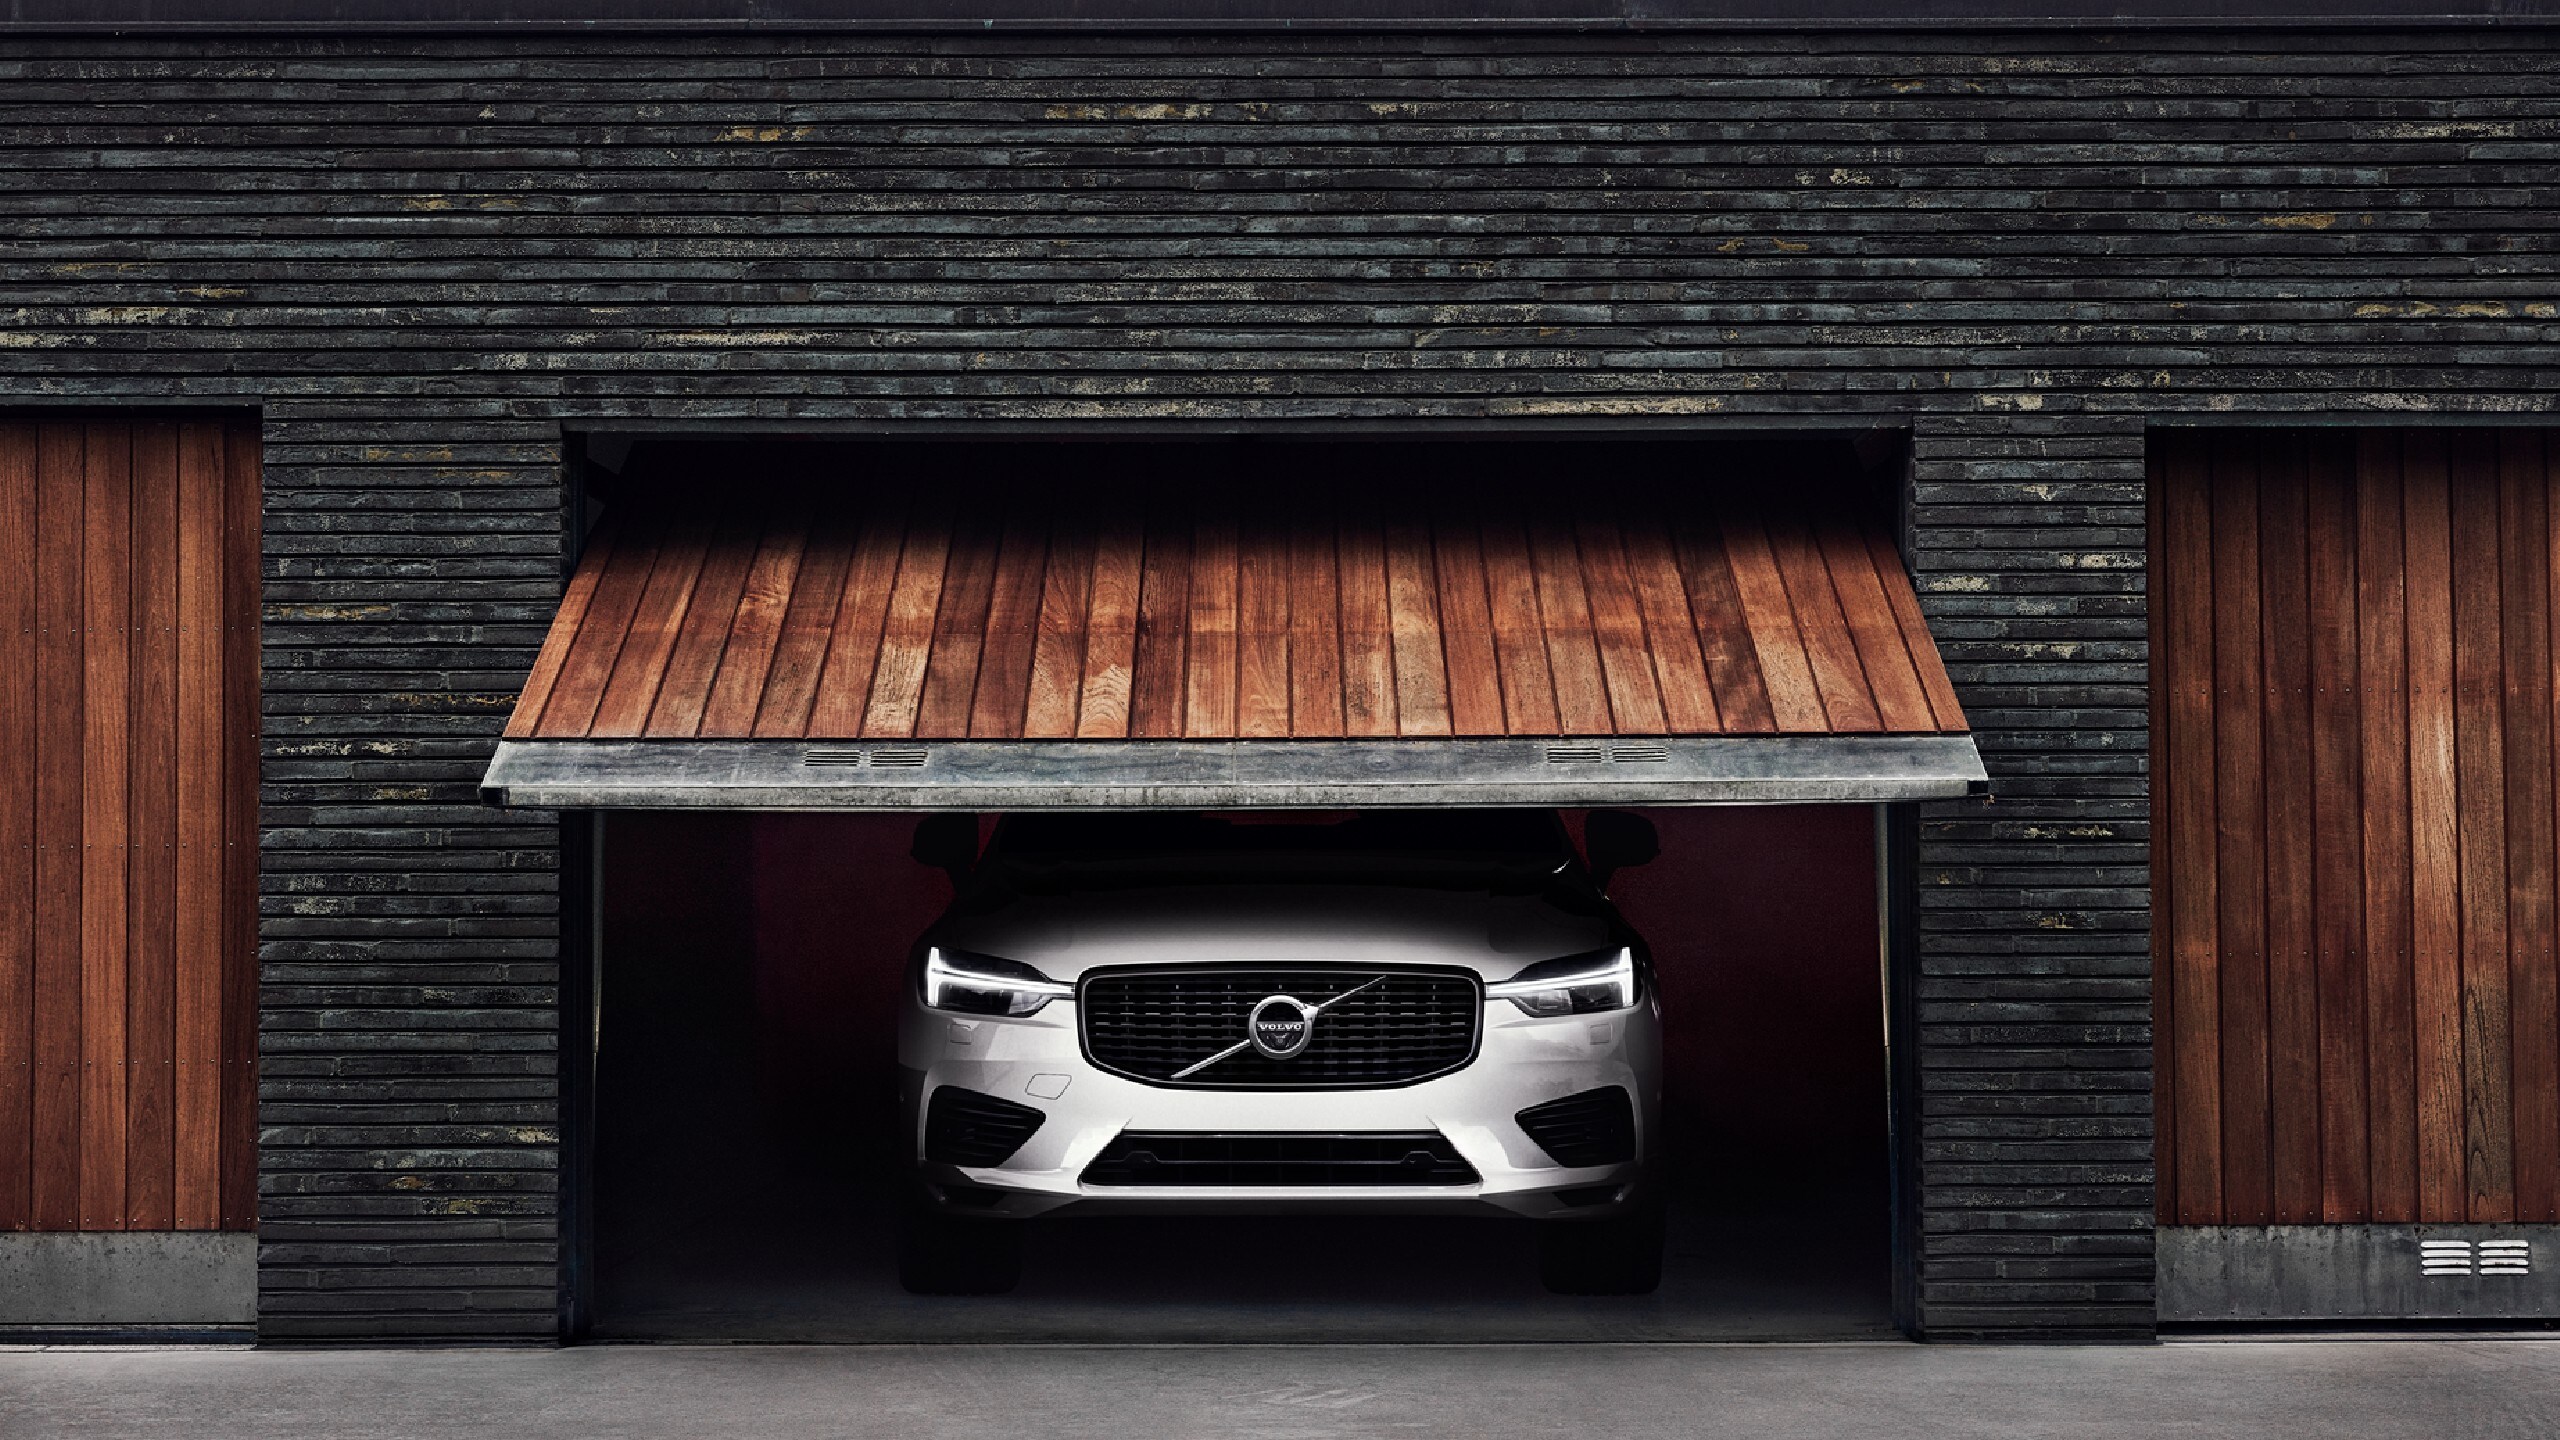 XC60 standing inside a garage, while the wooded front gate is opening.